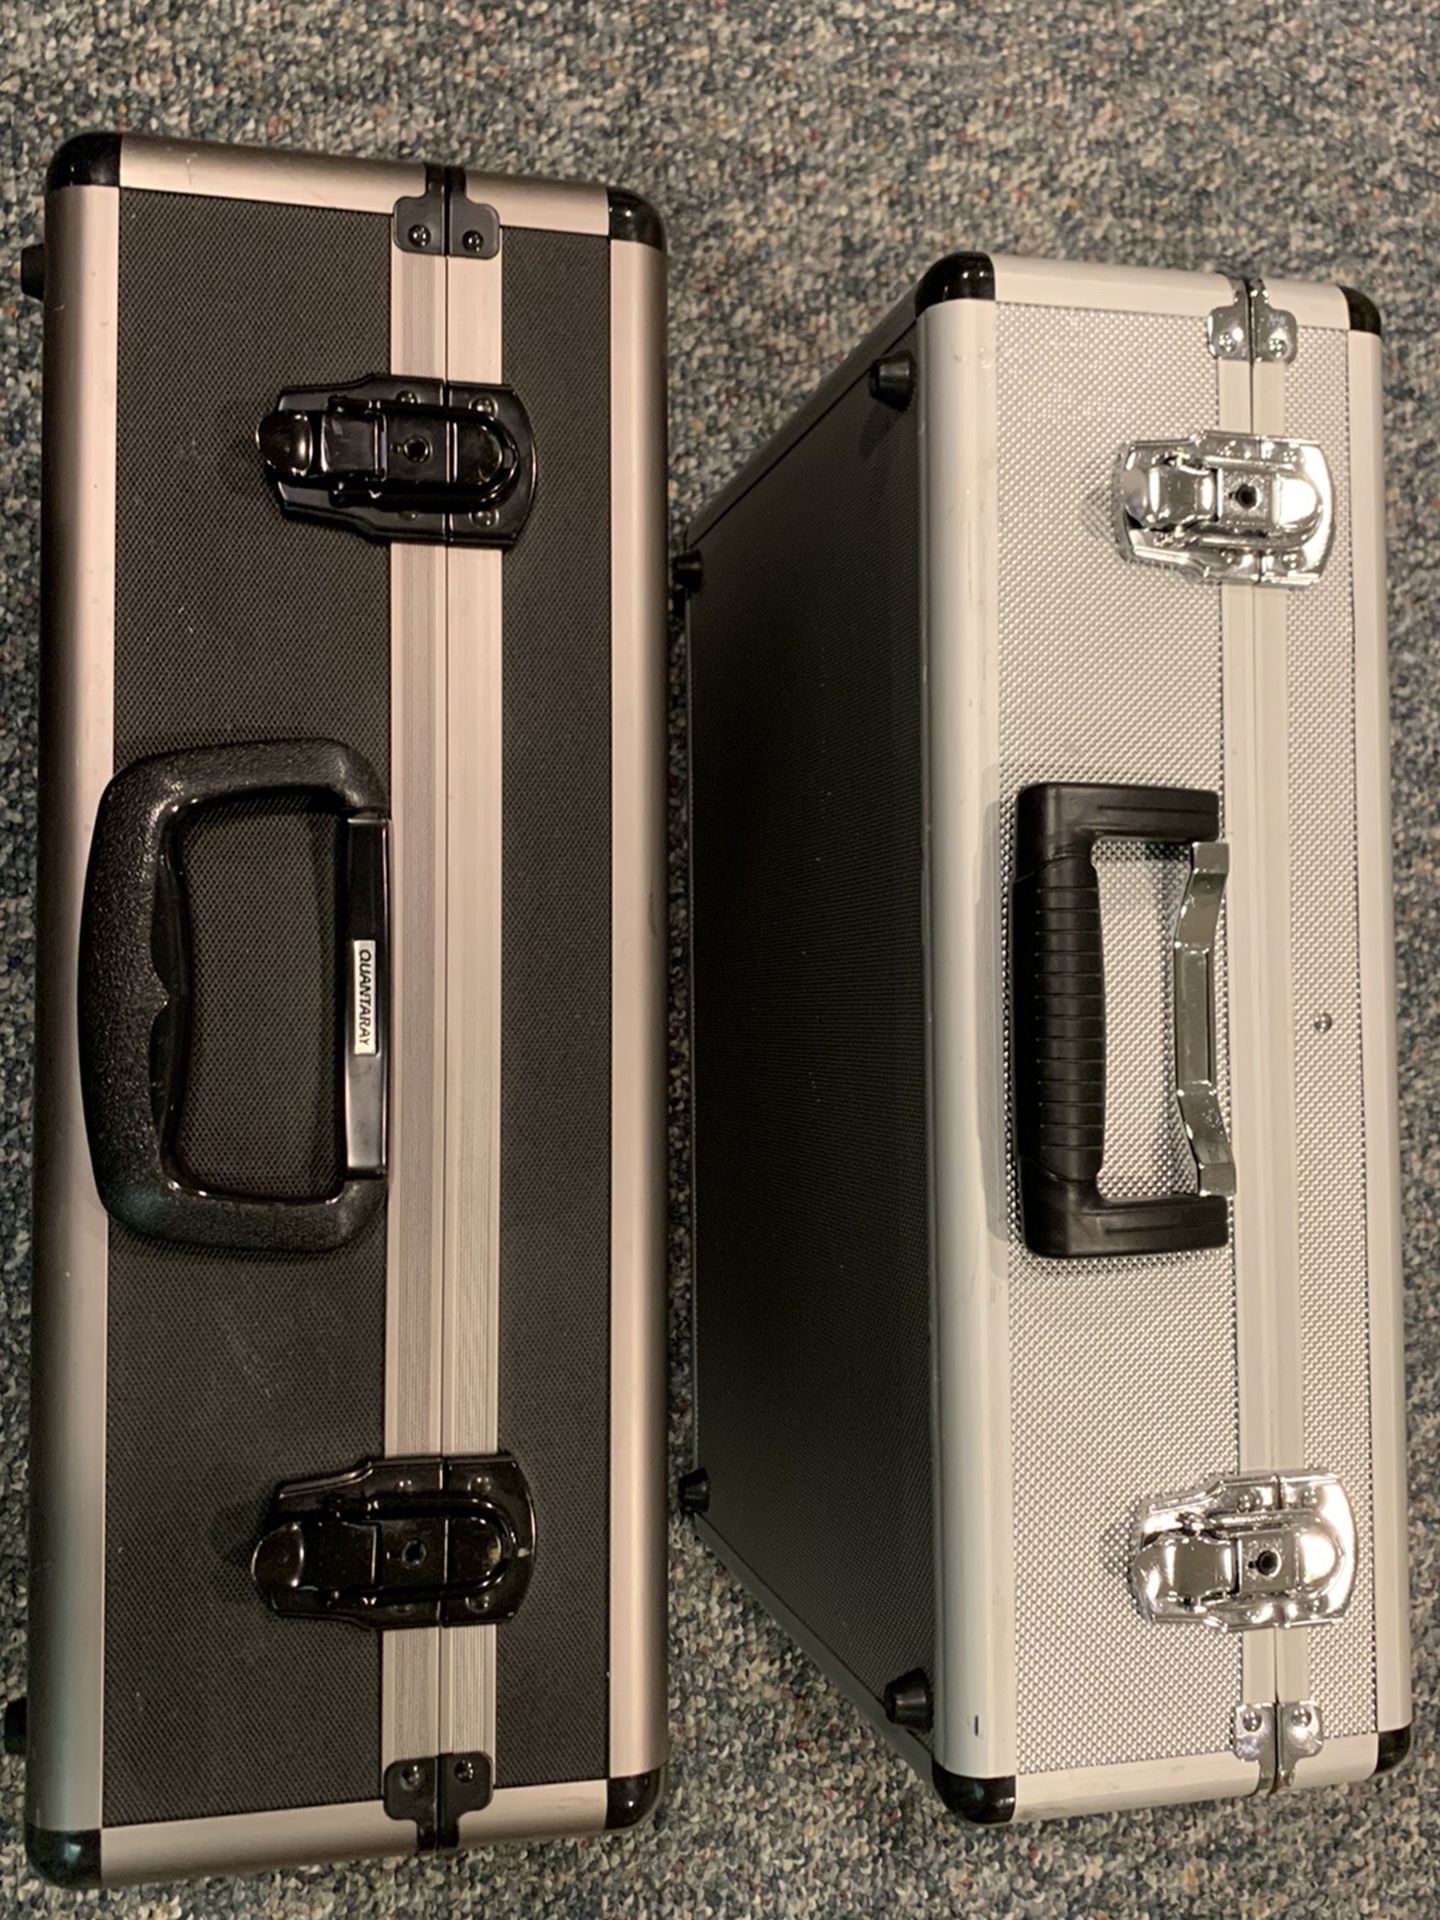 2 Metal Camera Or Electronic Equipment Cases